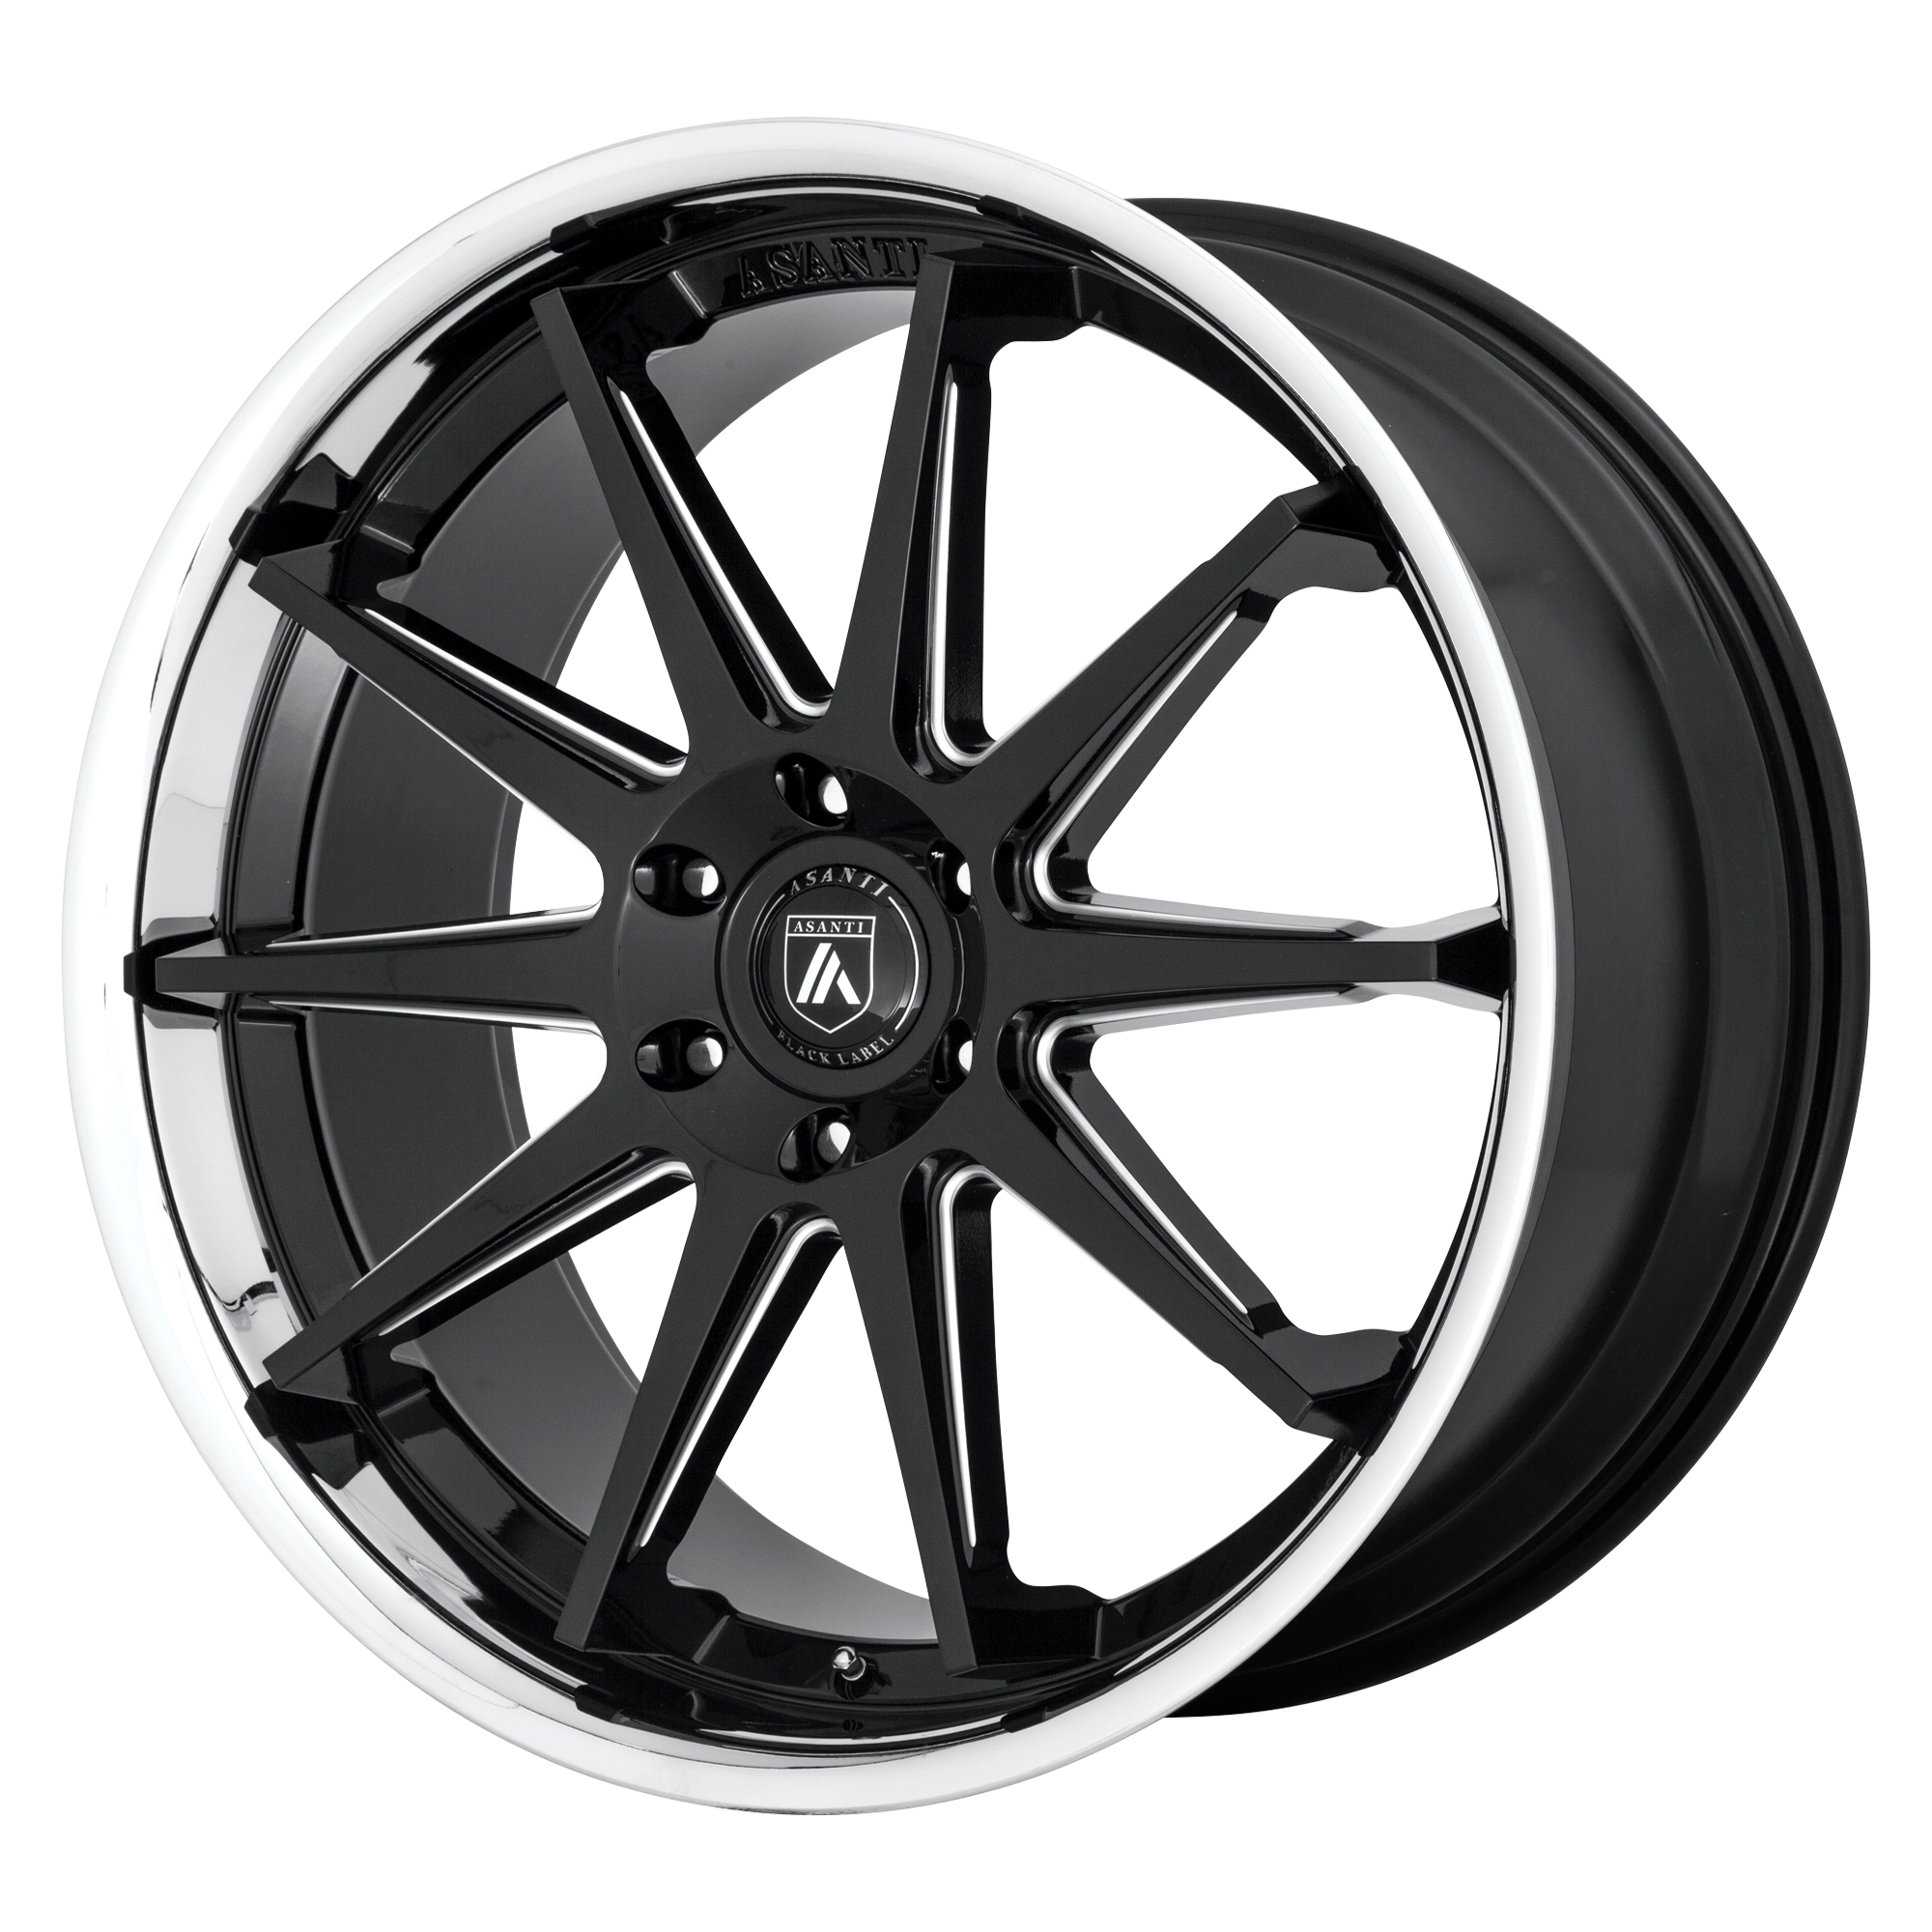 EMPEROR 24x10 6x135.00 GLOSS BLACK MILLED W/ CHROME LIP (30 mm) - Tires and Engine Performance